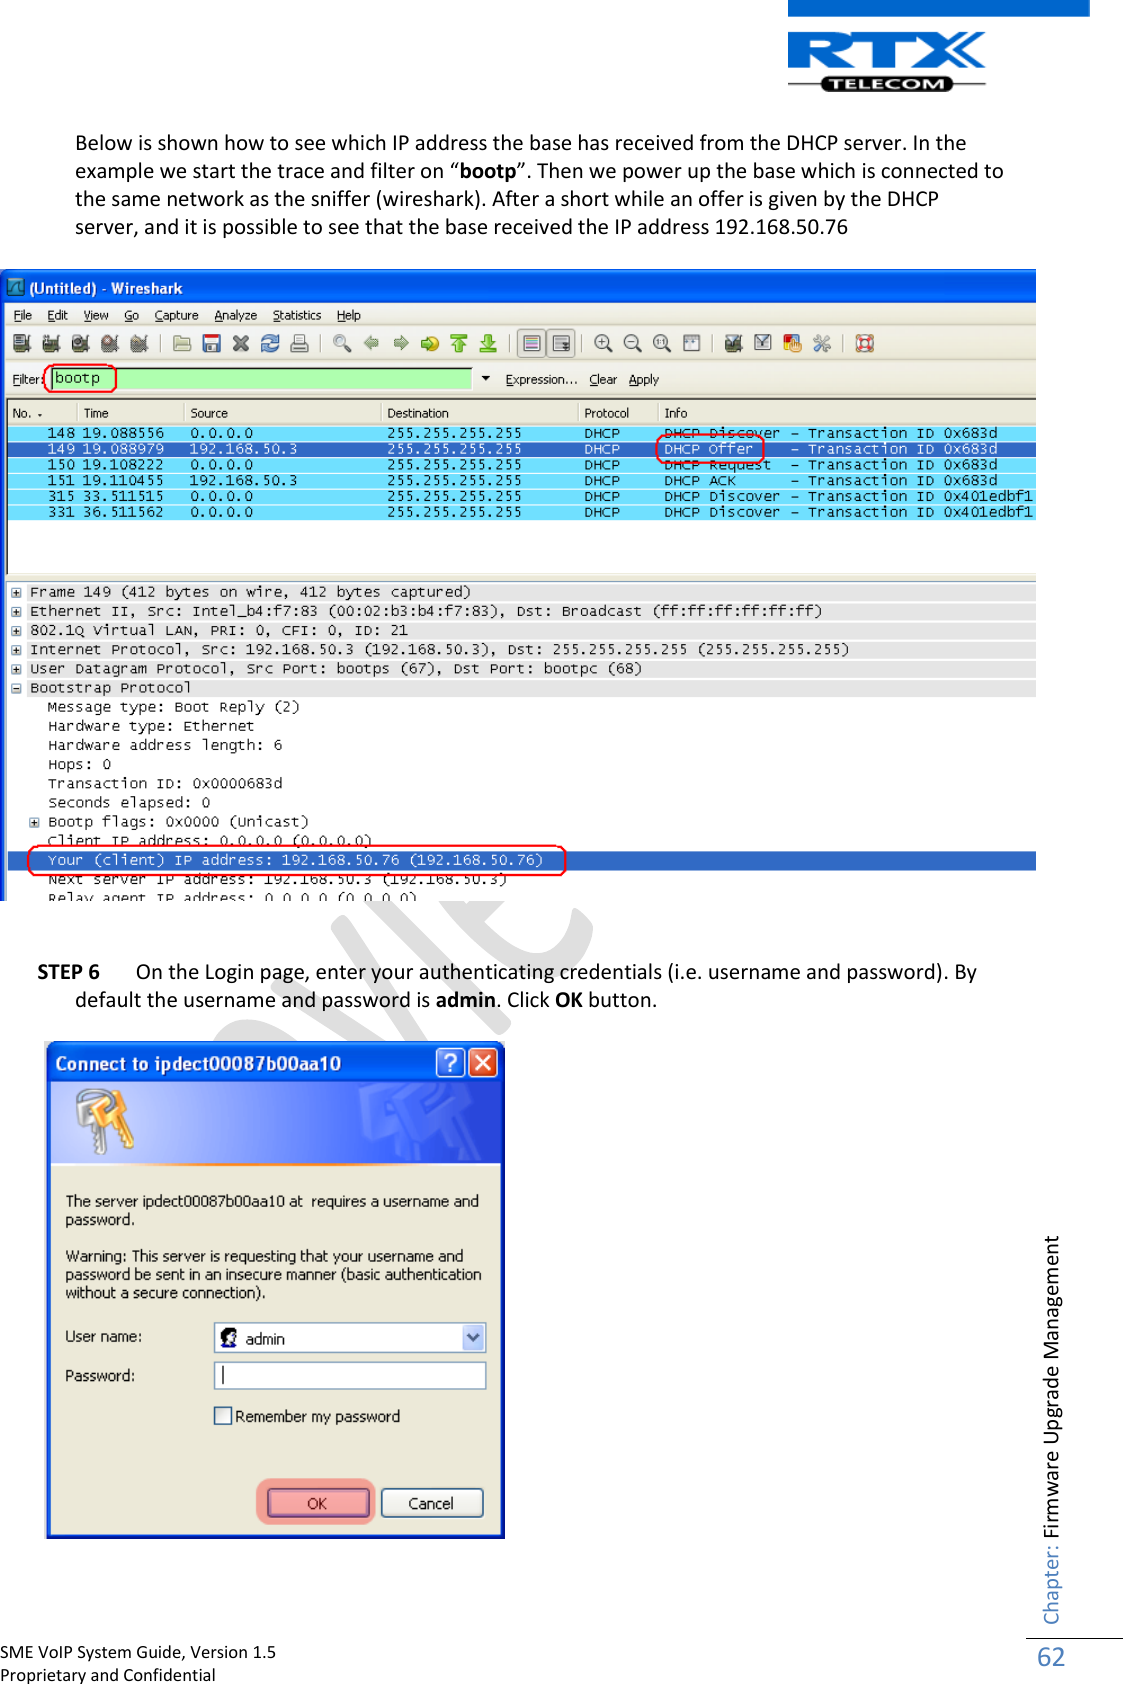    SME VoIP System Guide, Version 1.5                                                                                                                                                          Proprietary and Confidential    Chapter: Firmware Upgrade Management 62  Below is shown how to see which IP address the base has received from the DHCP server. In the example we start the trace and filter on “bootp”. Then we power up the base which is connected to the same network as the sniffer (wireshark). After a short while an offer is given by the DHCP server, and it is possible to see that the base received the IP address 192.168.50.76   STEP 6 On the Login page, enter your authenticating credentials (i.e. username and password). By default the username and password is admin. Click OK button.     